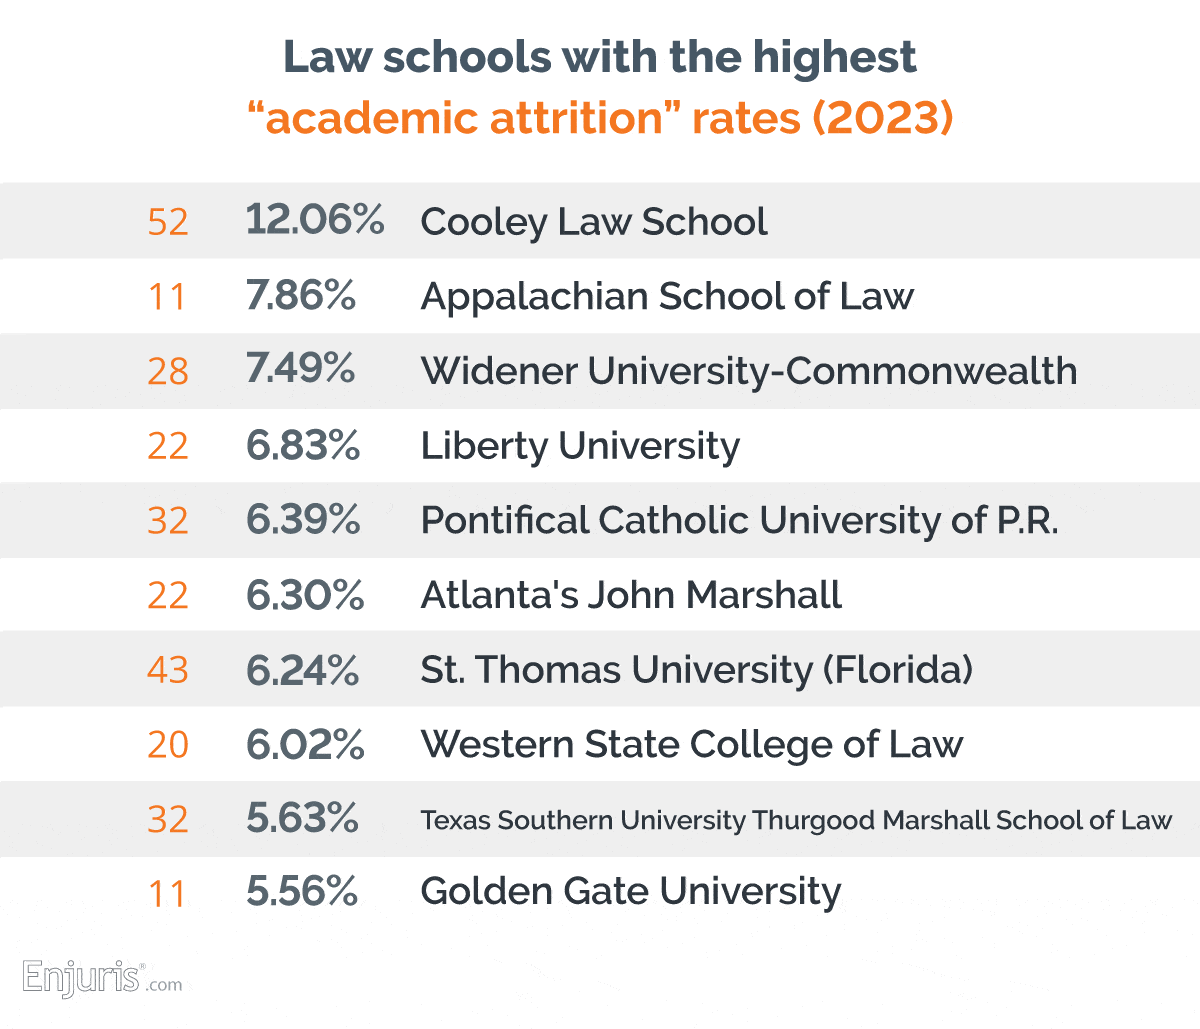 Law schools with the highest “academic attrition” rates (2023)